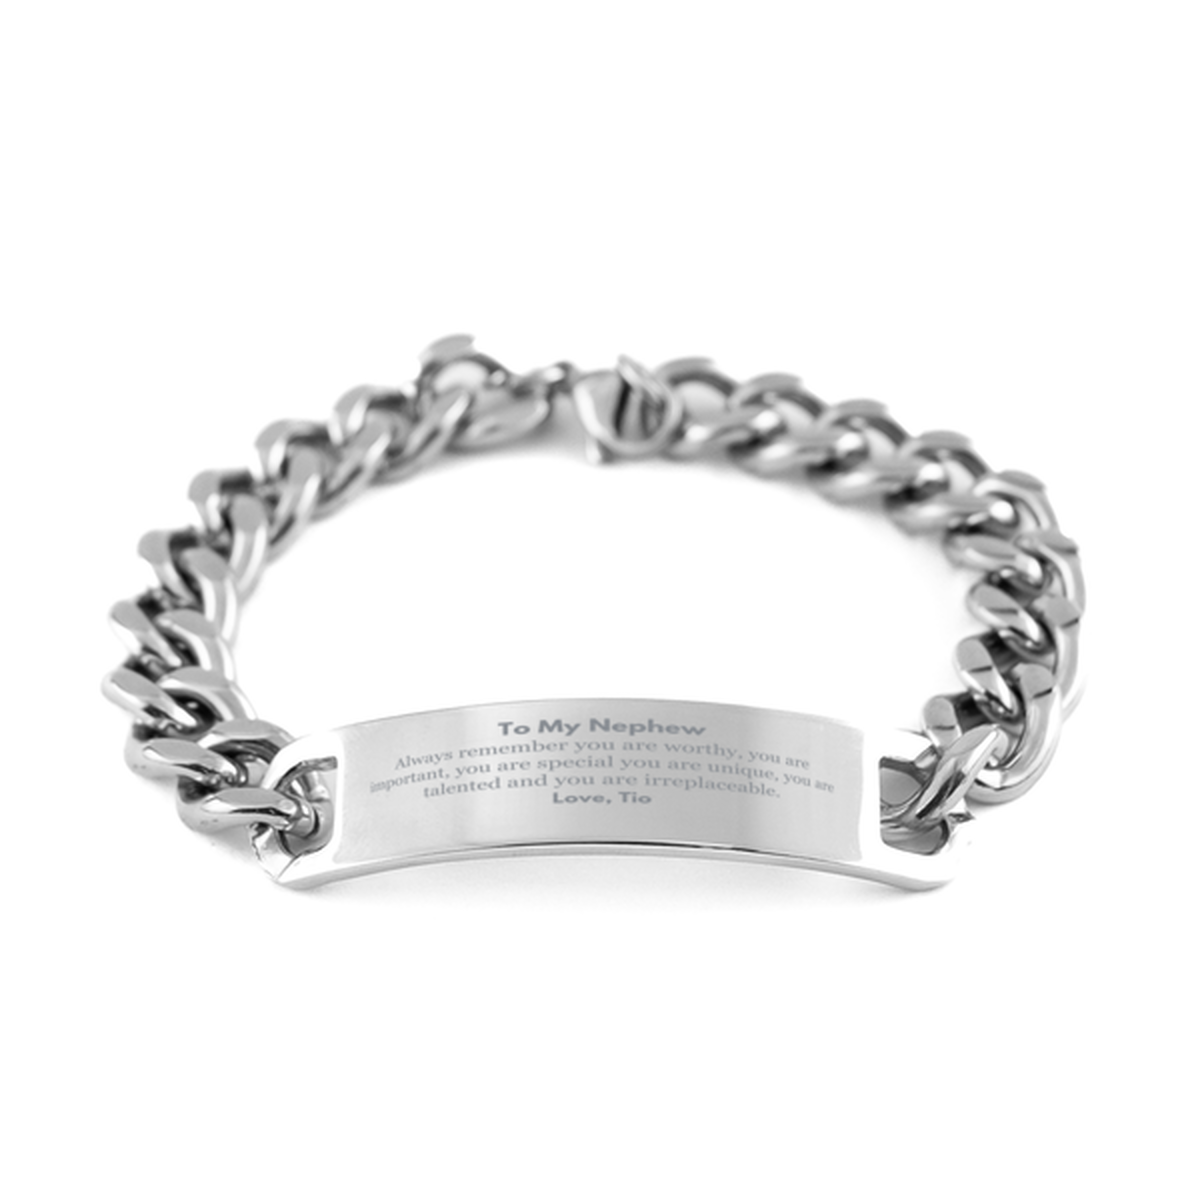 Nephew Birthday Gifts from Tio, Inspirational Cuban Chain Stainless Steel Bracelet for Nephew Christmas Graduation Gifts for Nephew Always remember you are worthy, you are important. Love, Tio